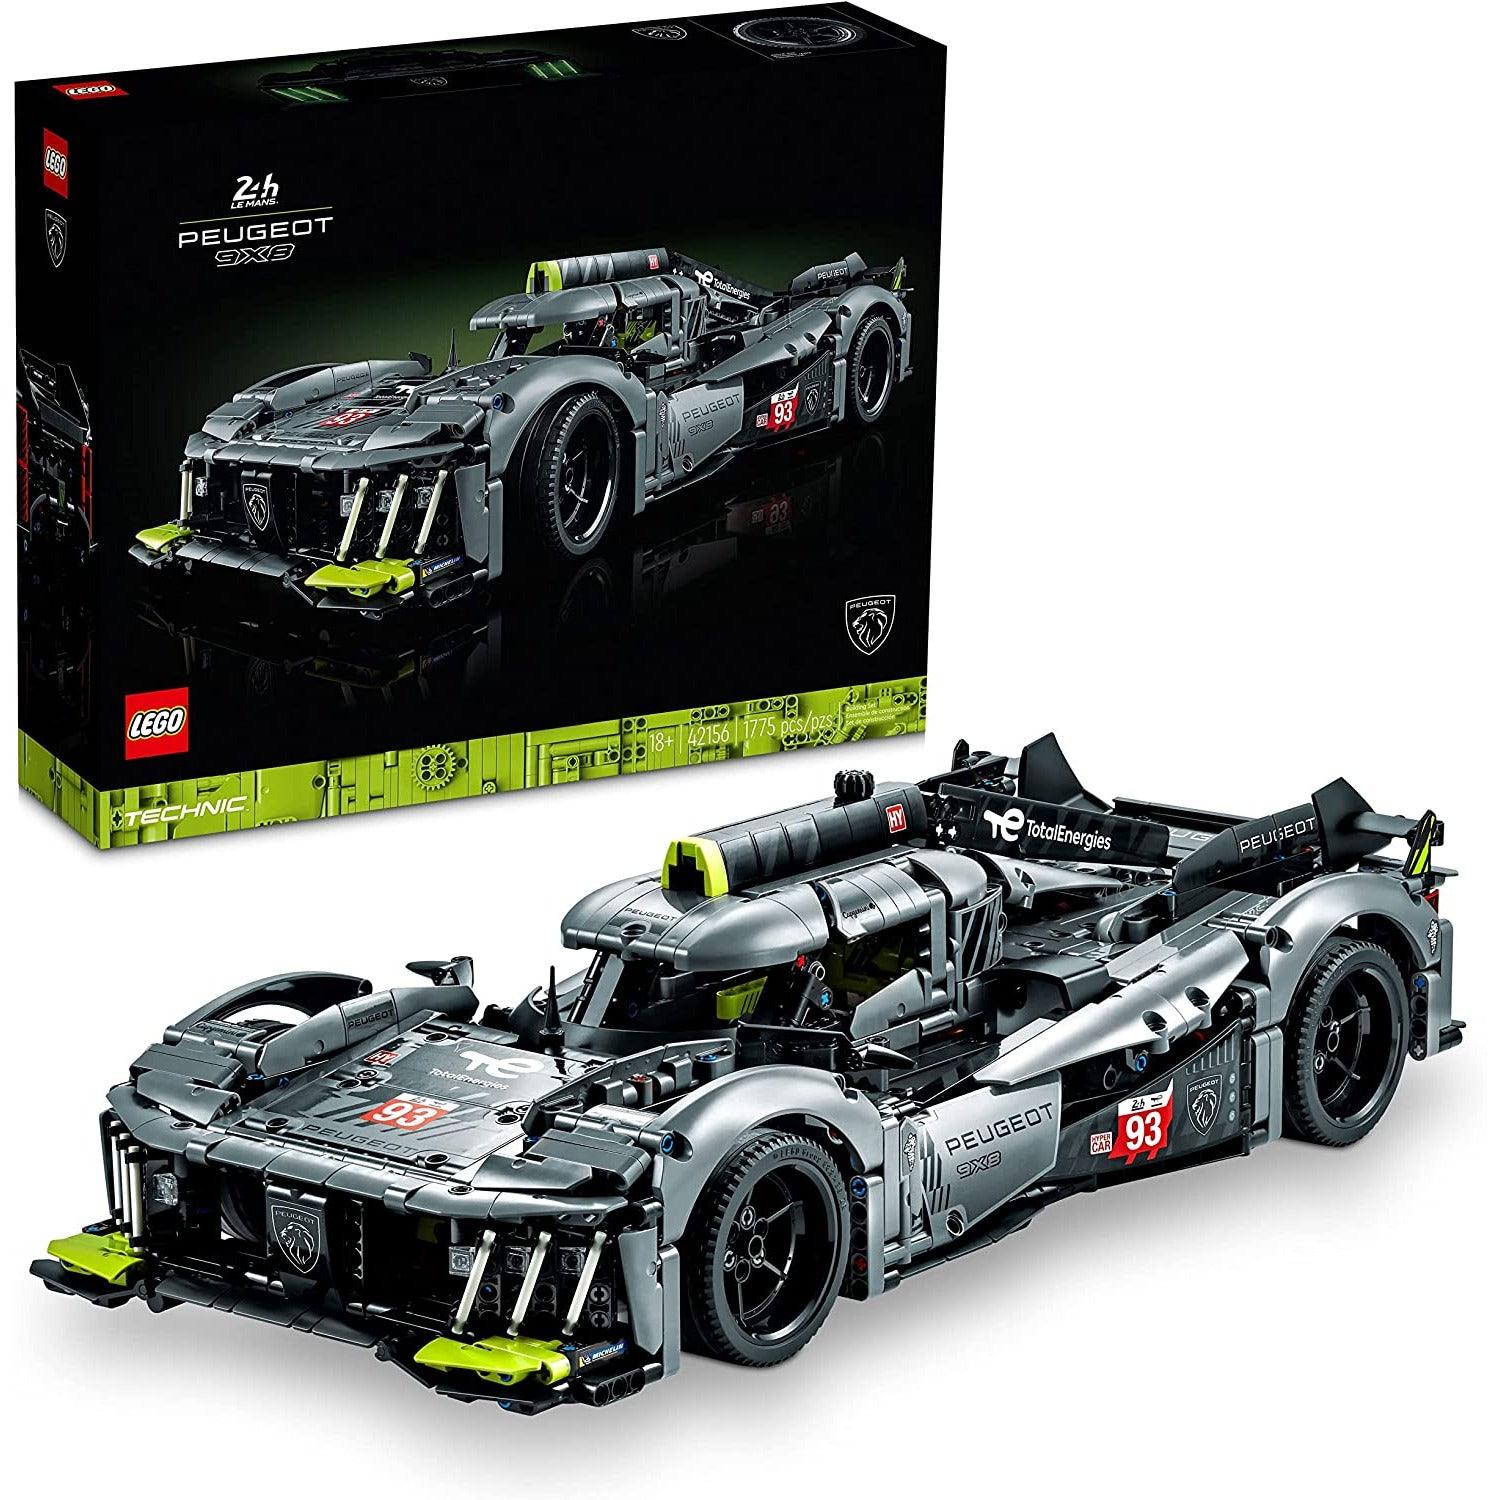 LEGO Technic Peugeot 9X8 24H Le Mans Hybrid Hypercar 42156 Collectible Race Car Building Kit for Adults and Teens, 1:10 Scale Racing Car Model